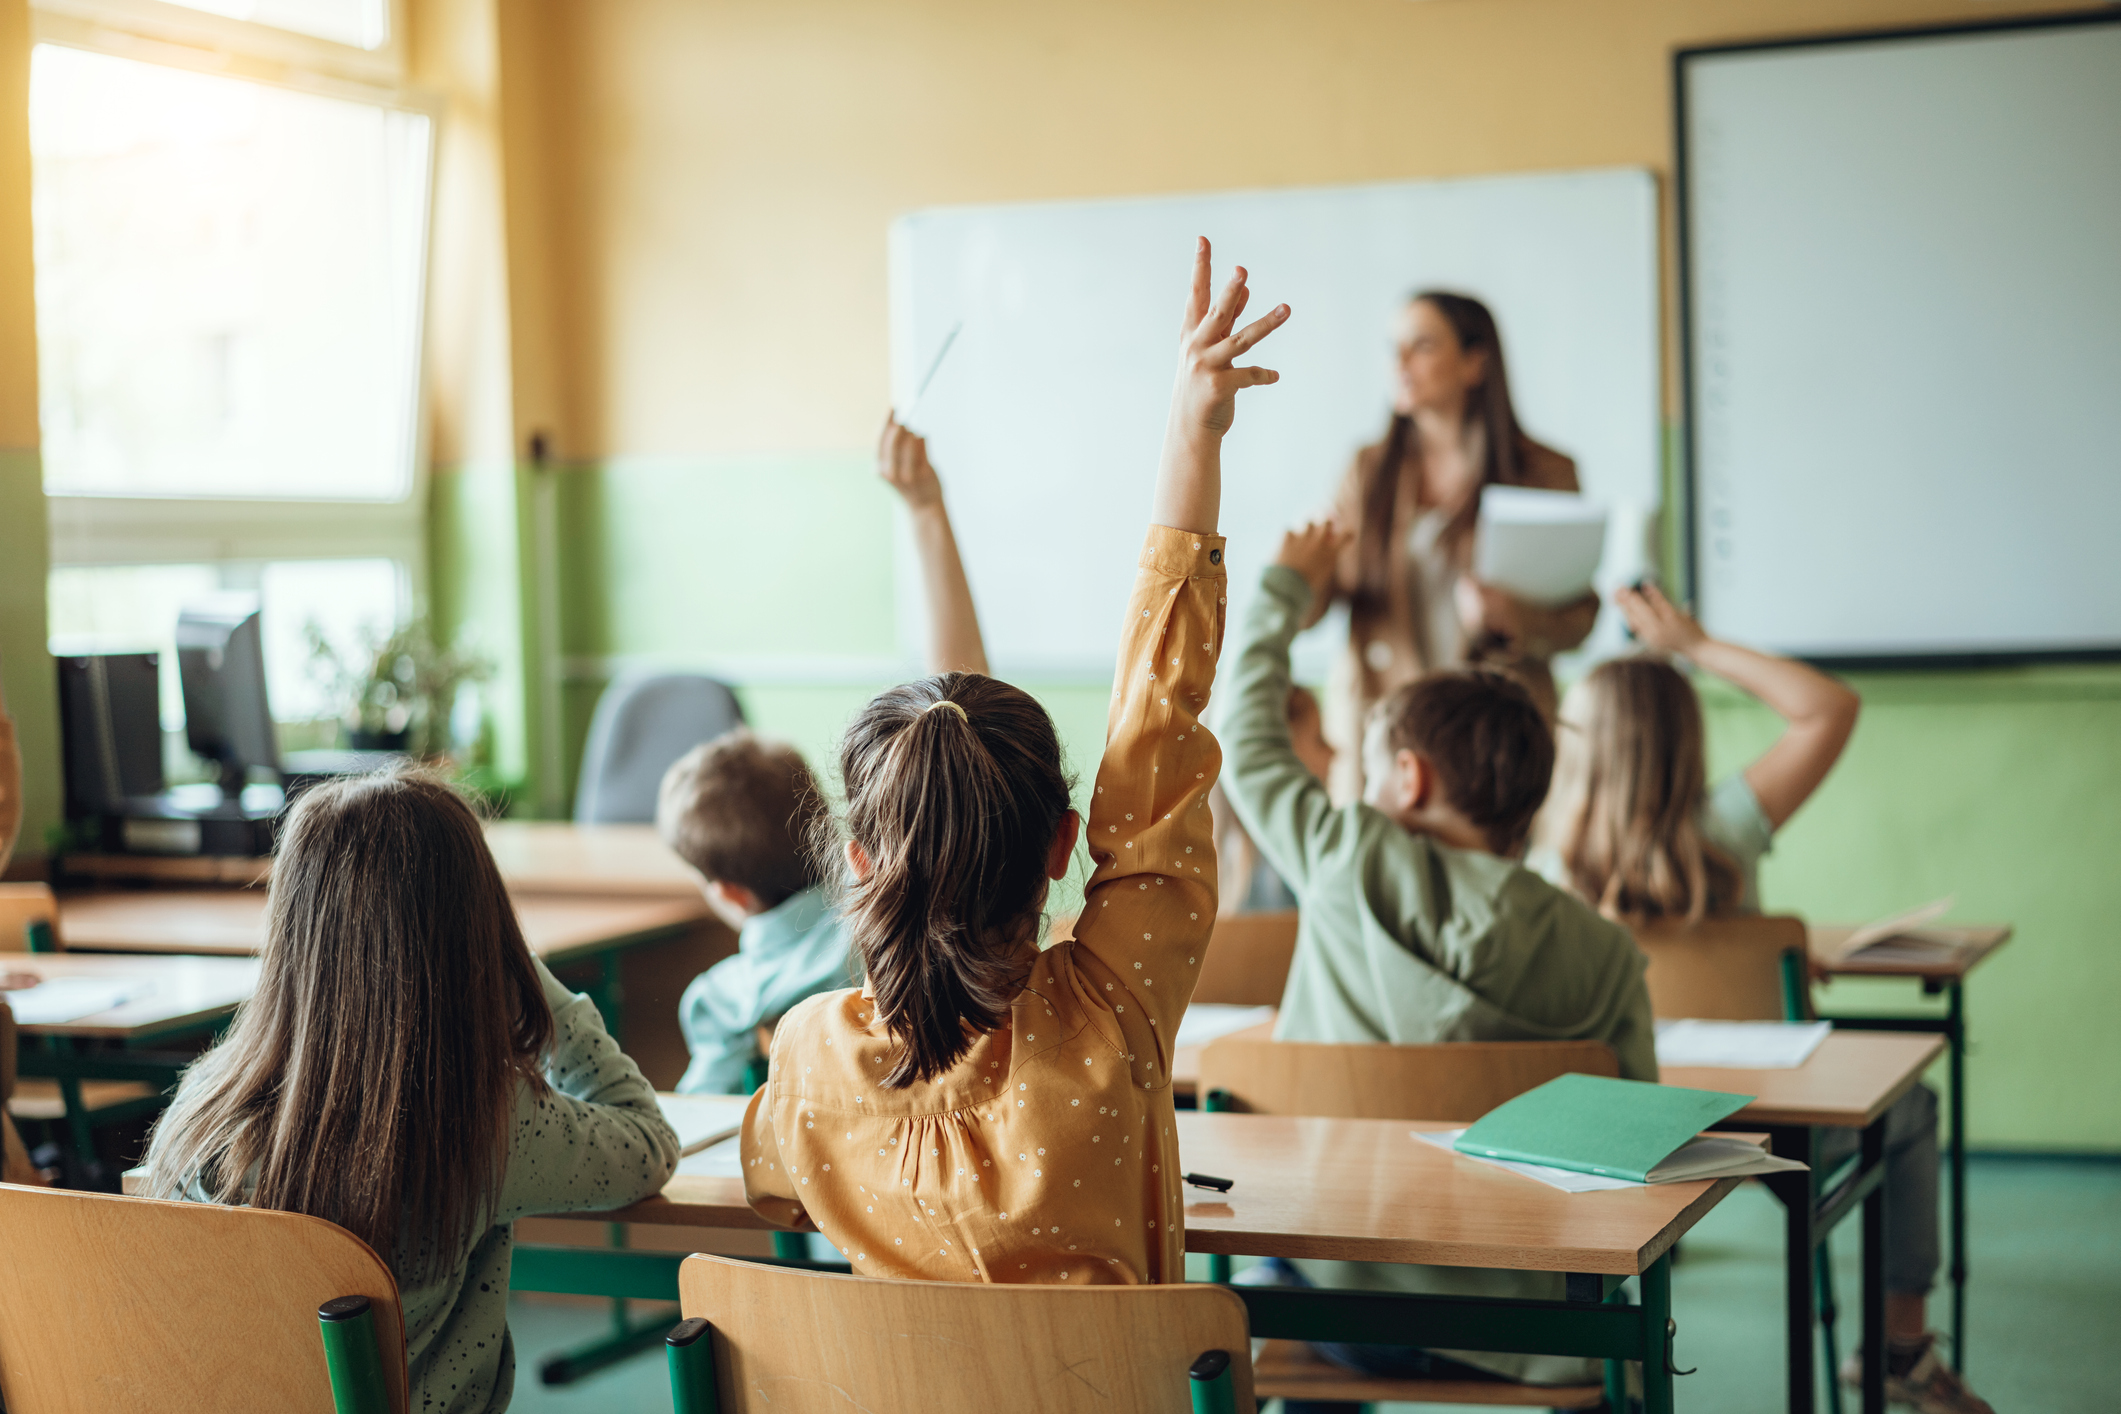 Students raising hands while teacher asking them questions in classroom